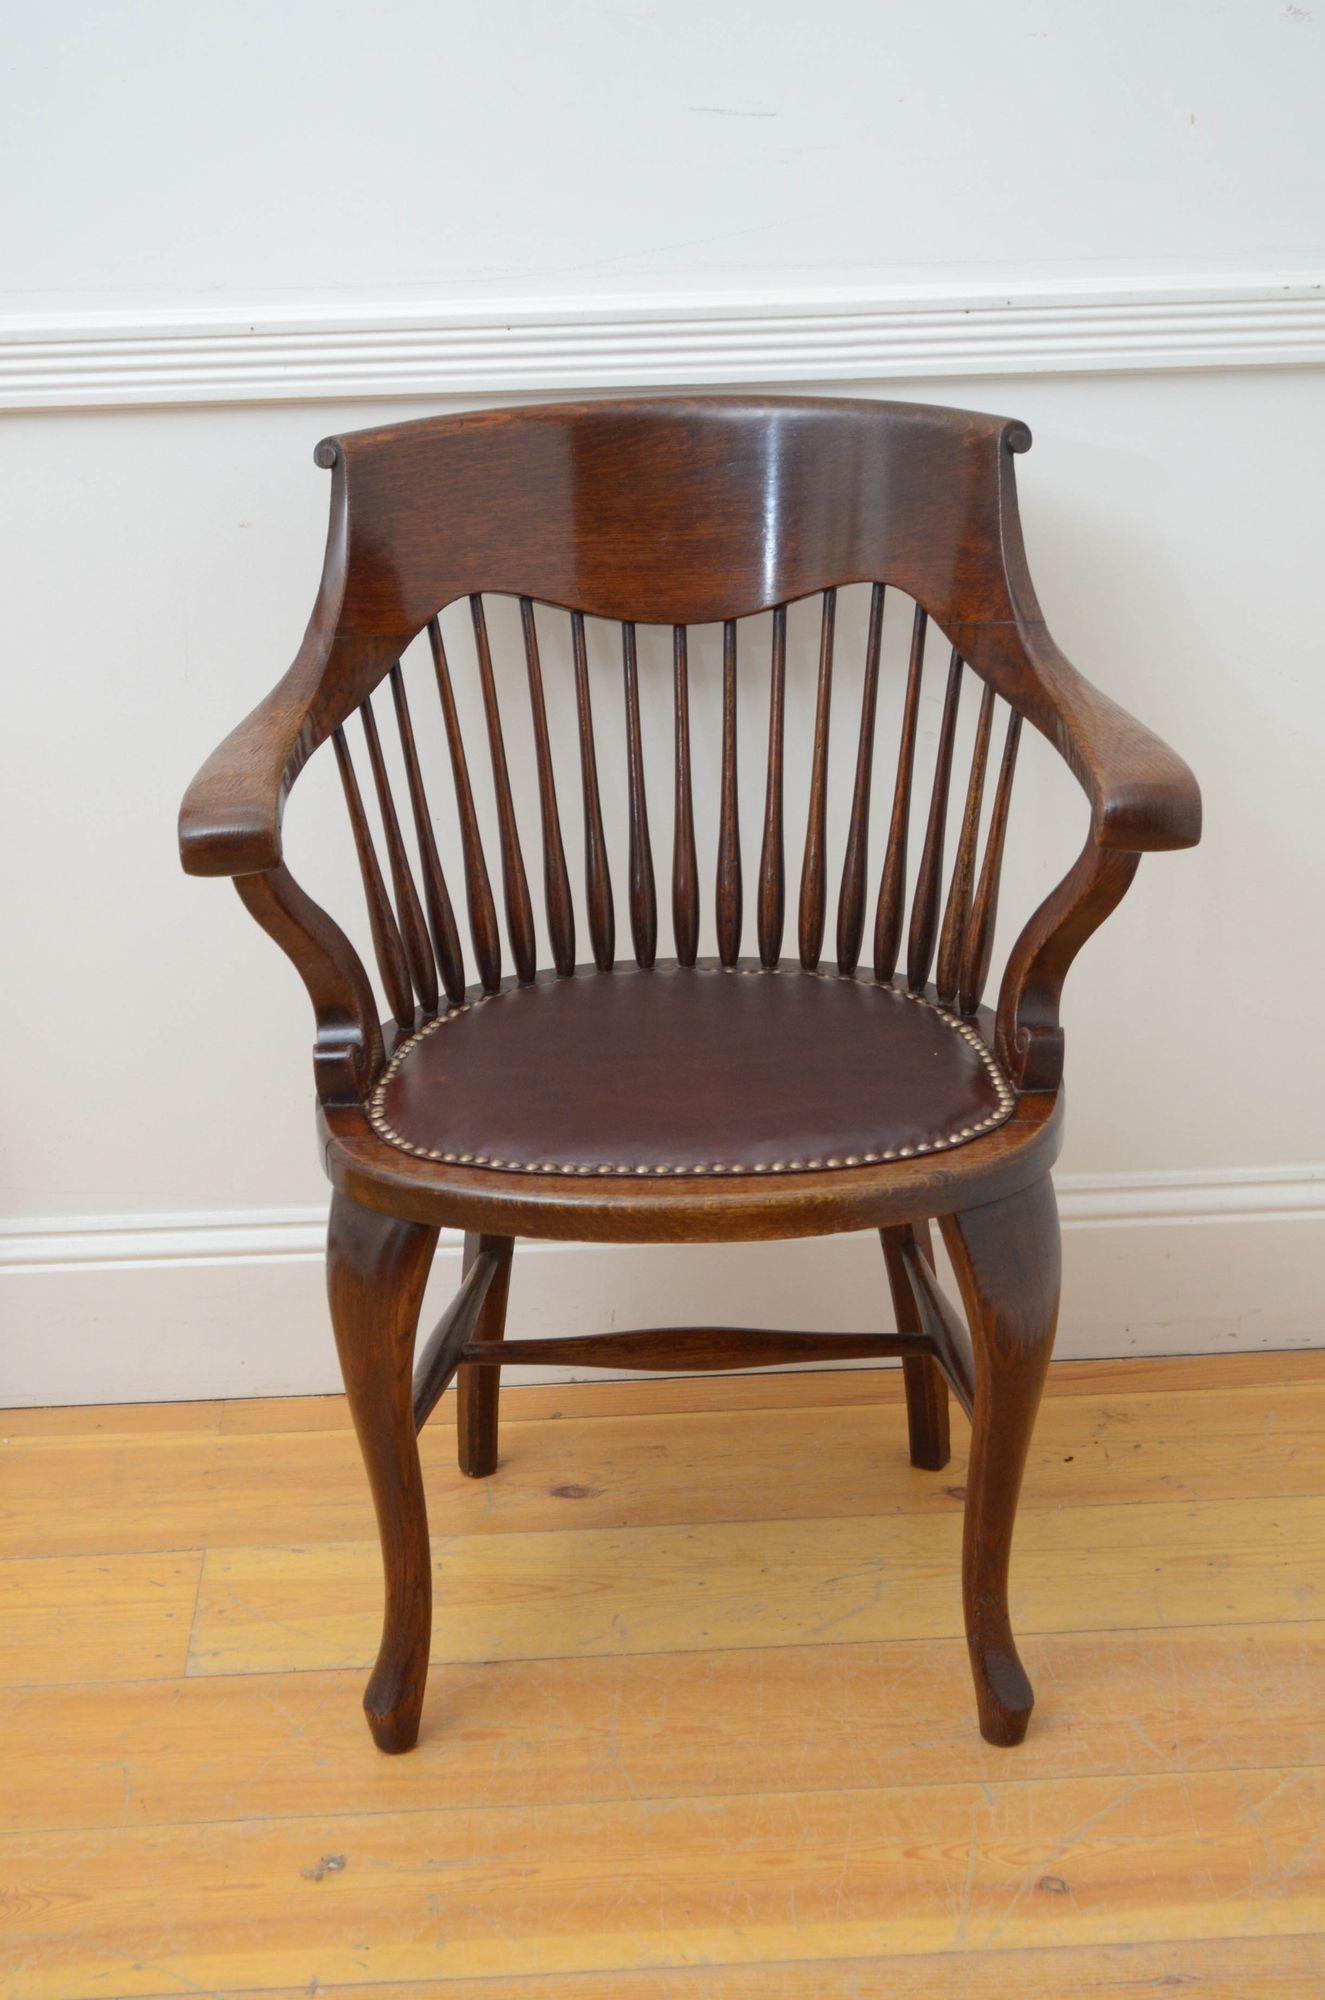 J029 Turn of the century desk chair /office chairs in oak, having shaped top rail with tapering spindles below, generous closely studded leather seat and downswept open arms, standing on cabriole legs united by stretchers. This antique chair is in